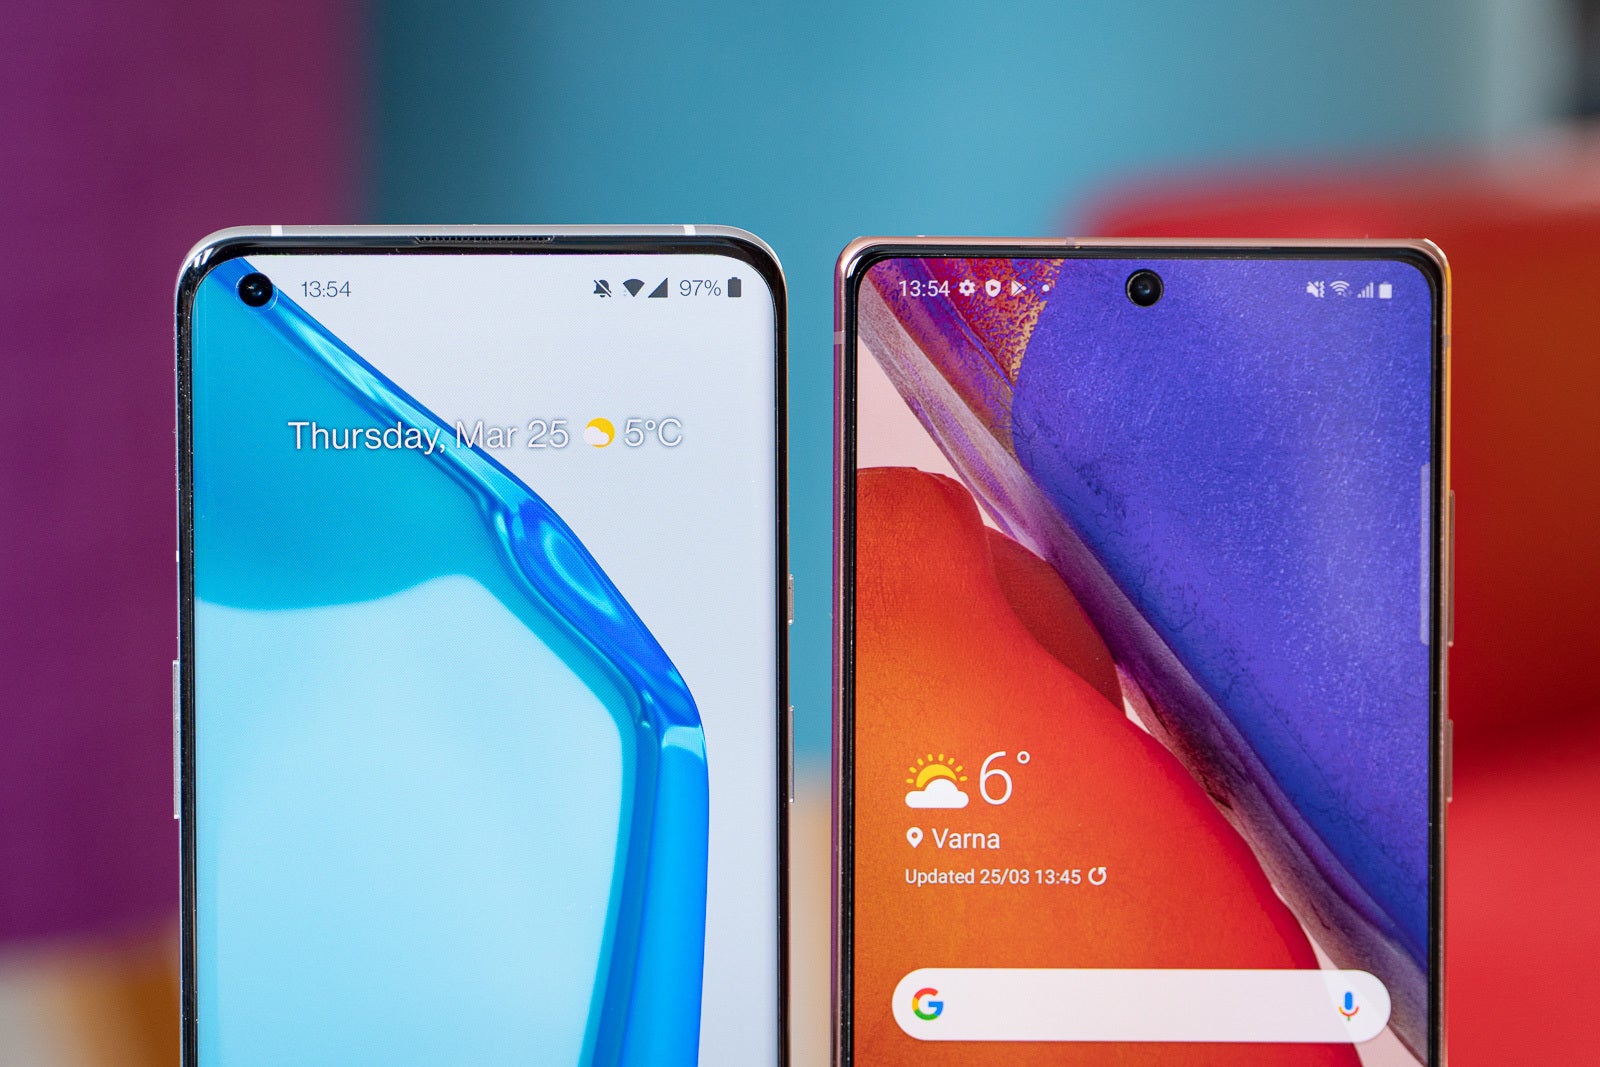 The OnePlus 9 Pro (left) and Galaxy Note 20 (right) - OnePlus 9 Pro vs Samsung Galaxy Note 20